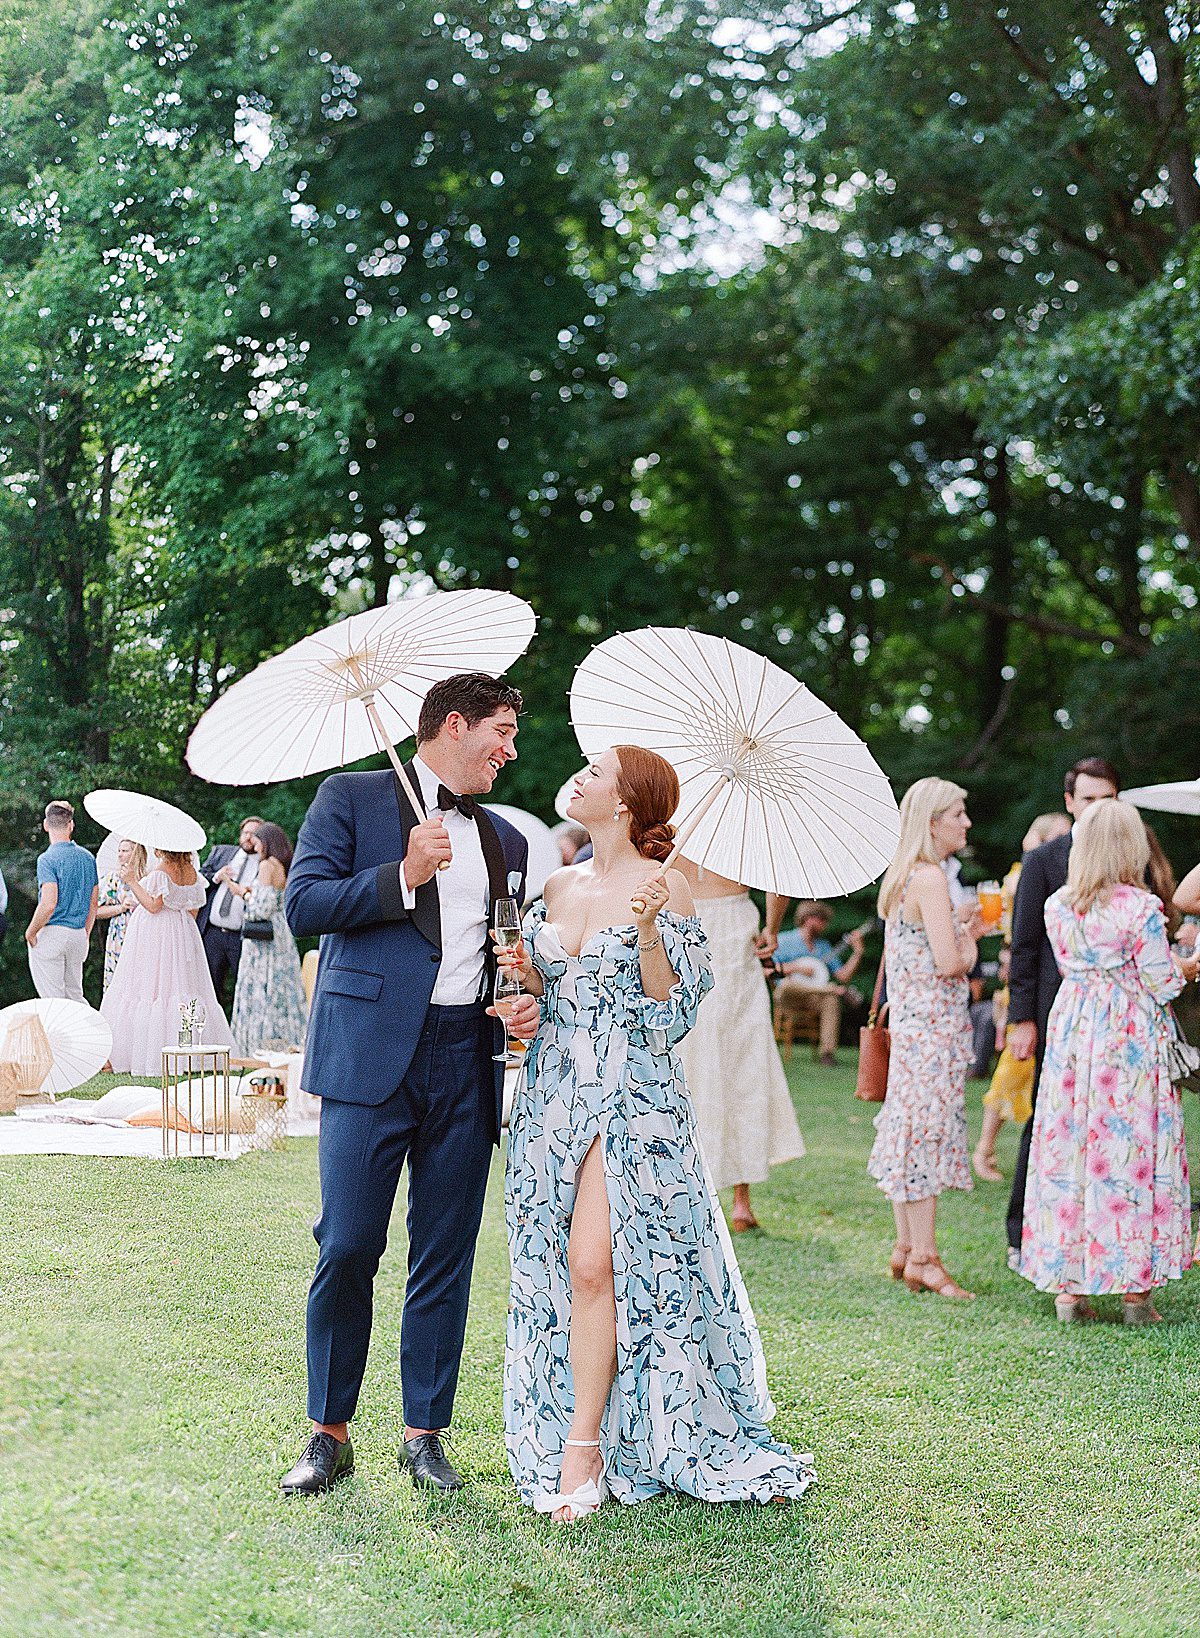 Artistic Asheville Wedding Photographer Captures Bride and Groom Smiling at Each Other Holding Parasols at Cocktail Hour Photo